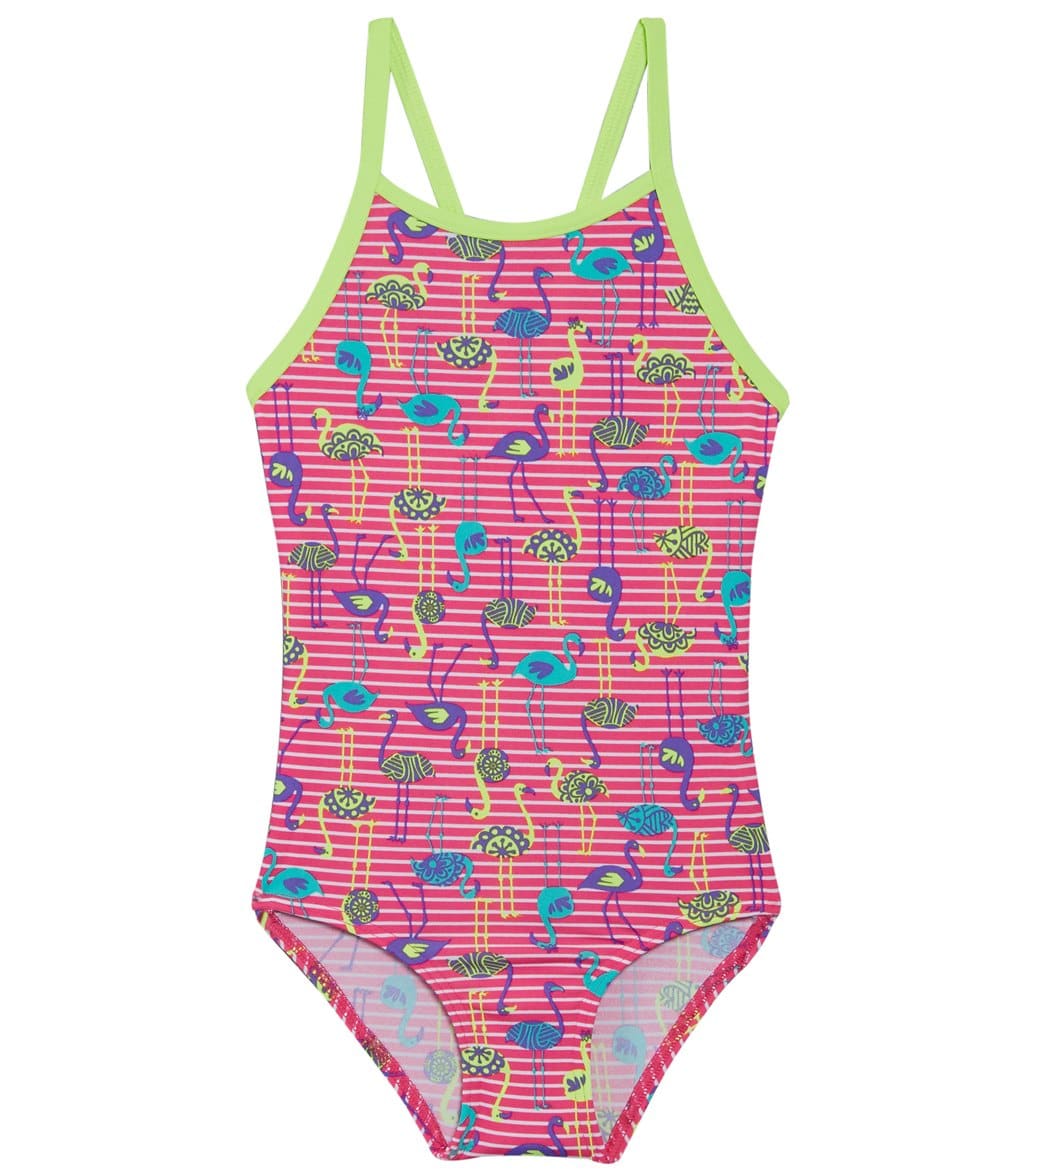 Funkita Toddler Girls' Flaming Stripes Printed One Piece Swimsuit - Multi Pink 1 Polyester - Swimoutlet.com